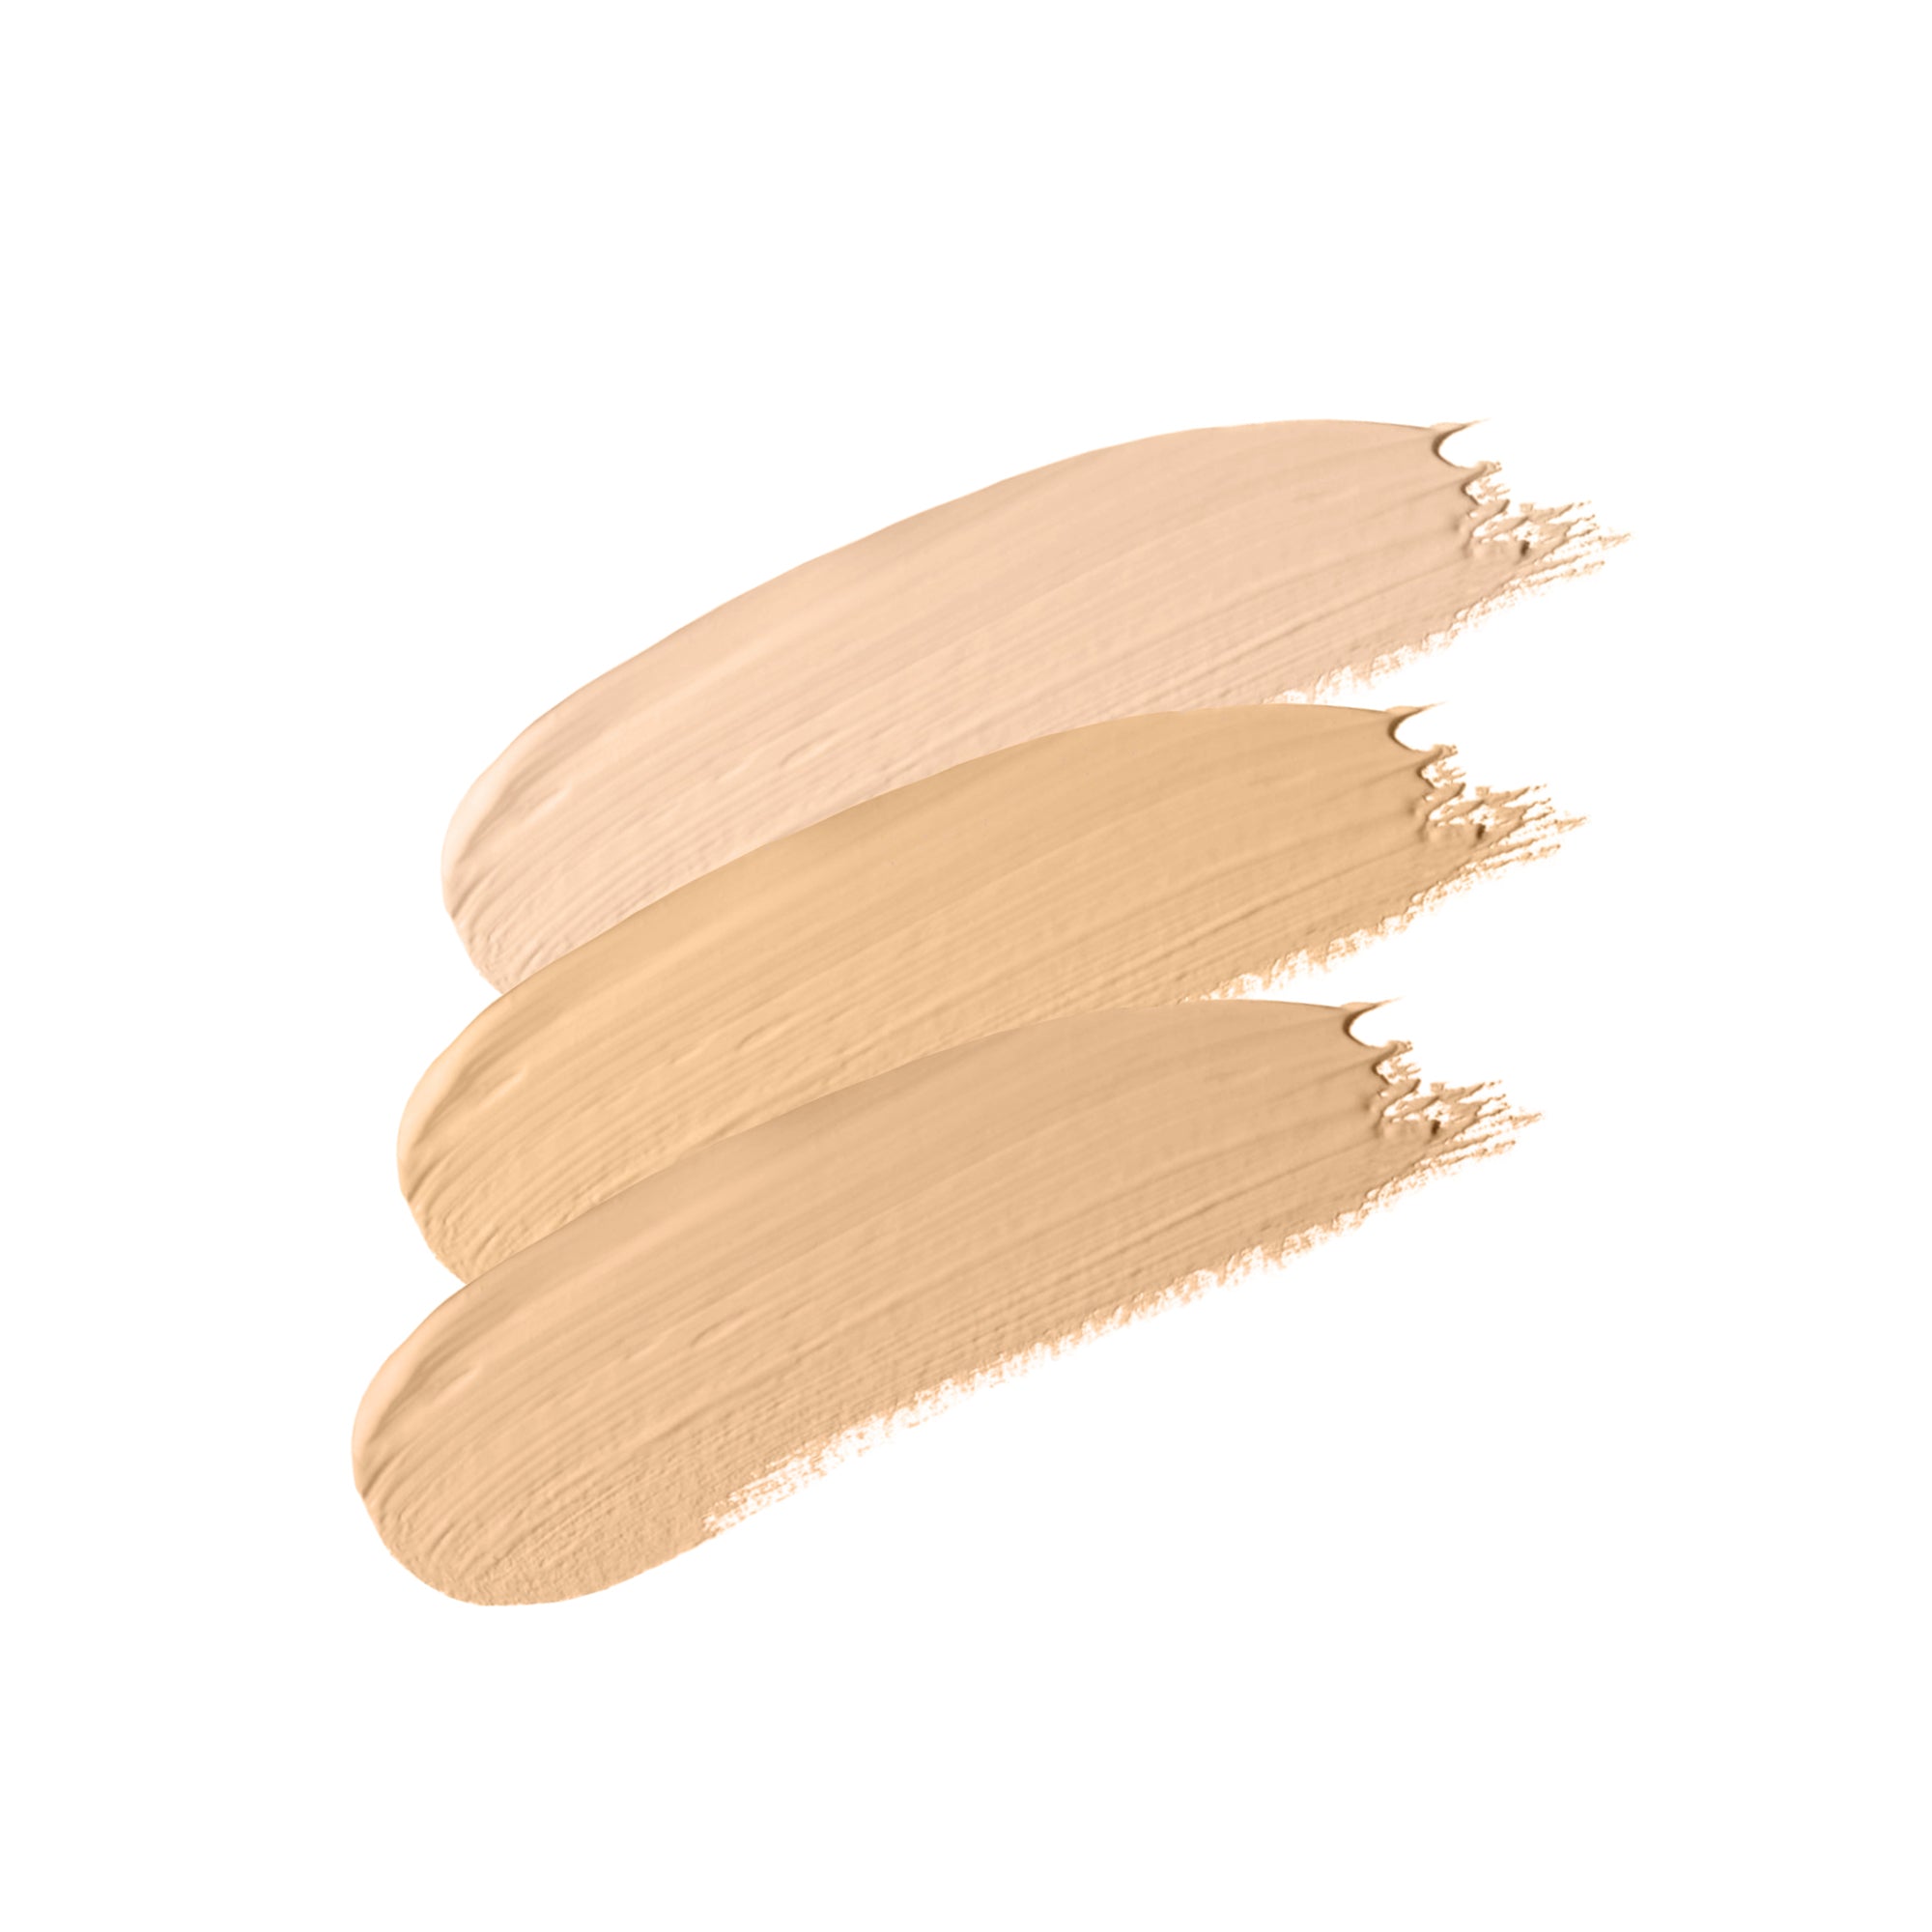 1 - LIGHT PINK - buildable, creamy, hydrating concealer in light pink undertone shade one in group shot